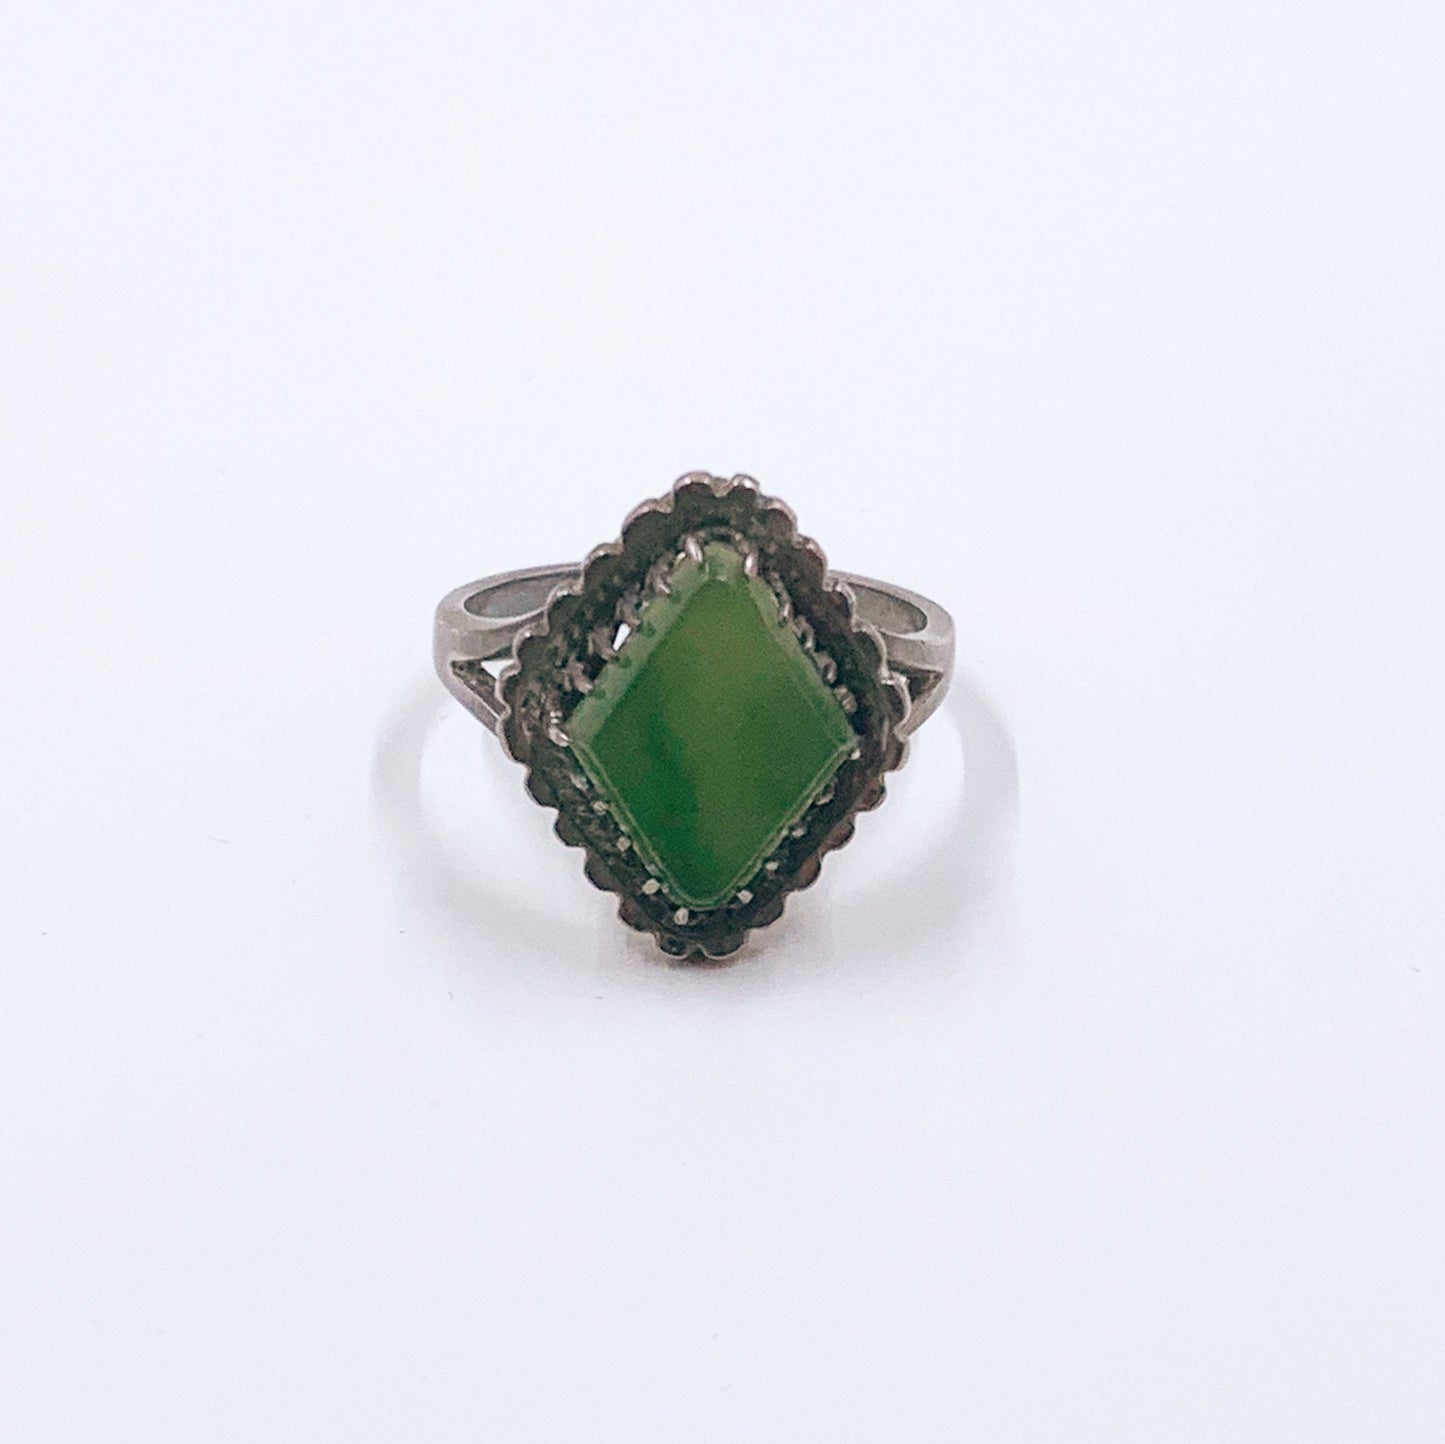 Antique Silver Green Stone Ring | Art Deco Green Stone Ring | Size 6 1/2